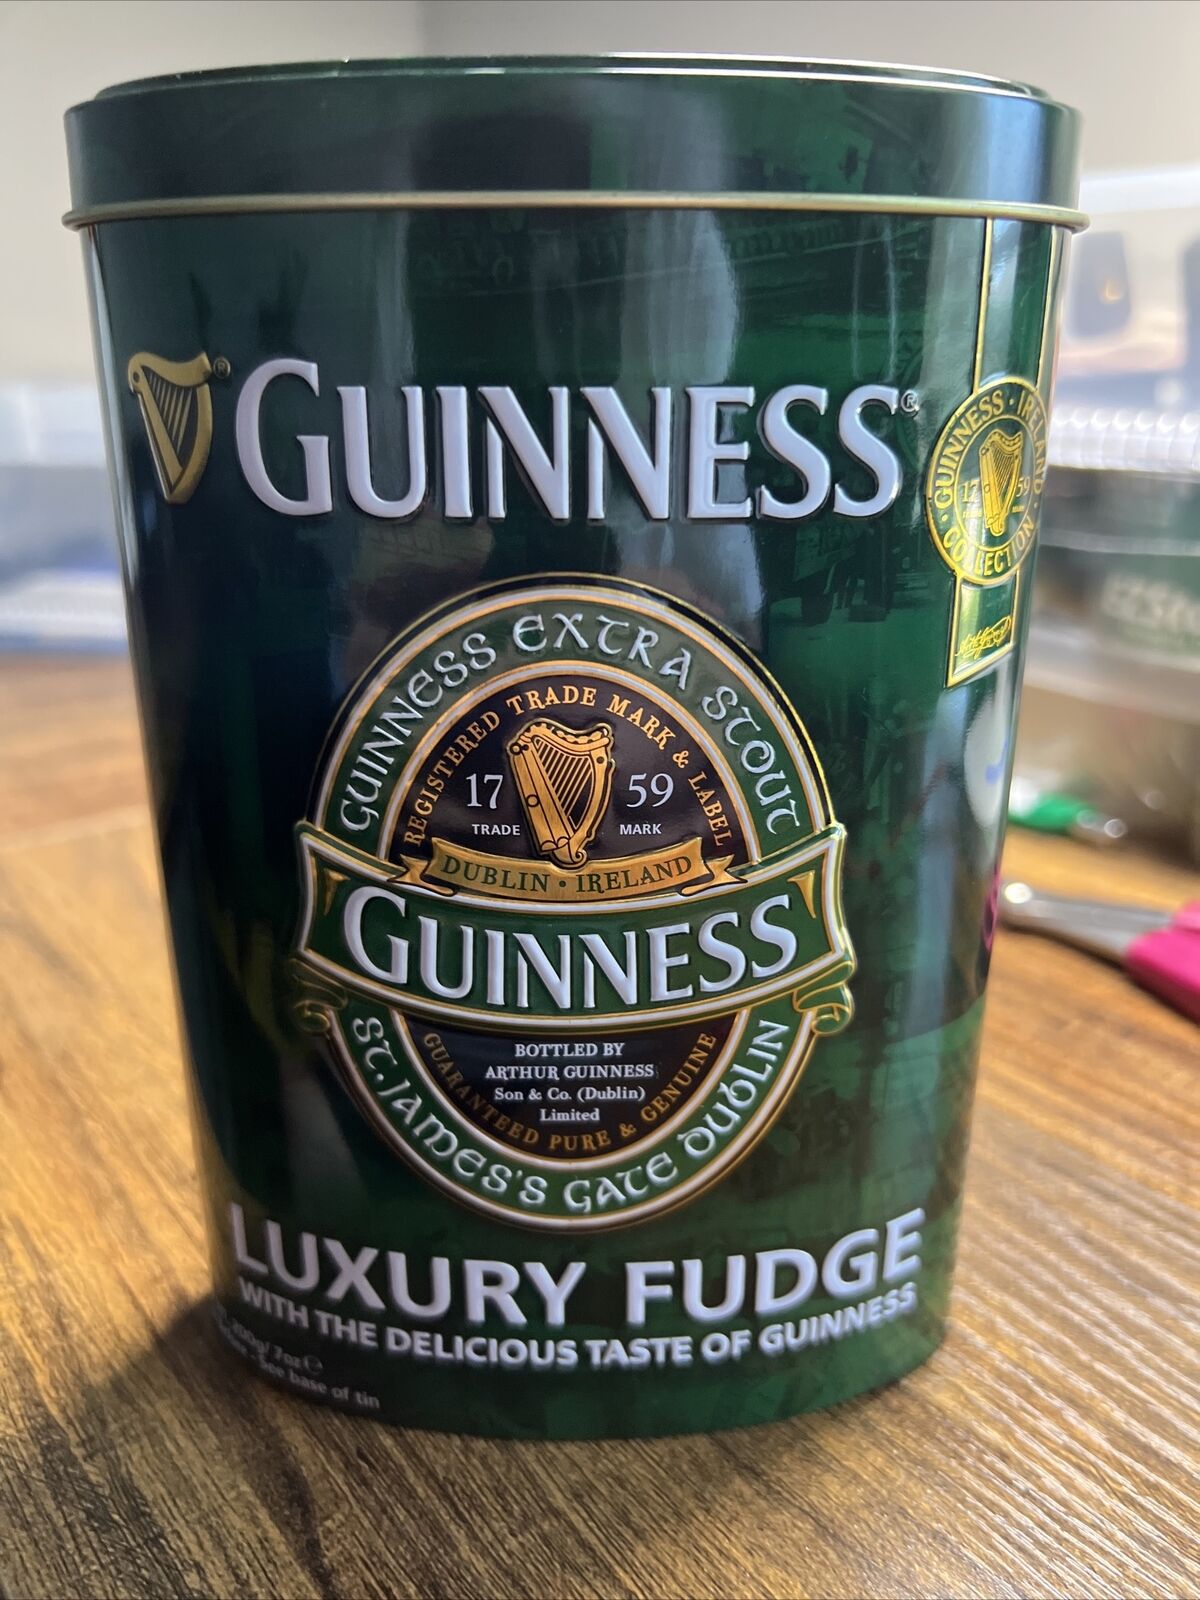 Guinness Ireland Collection Luxury Fudge Oval Shaped Green Tin Empty 6.5” Tall